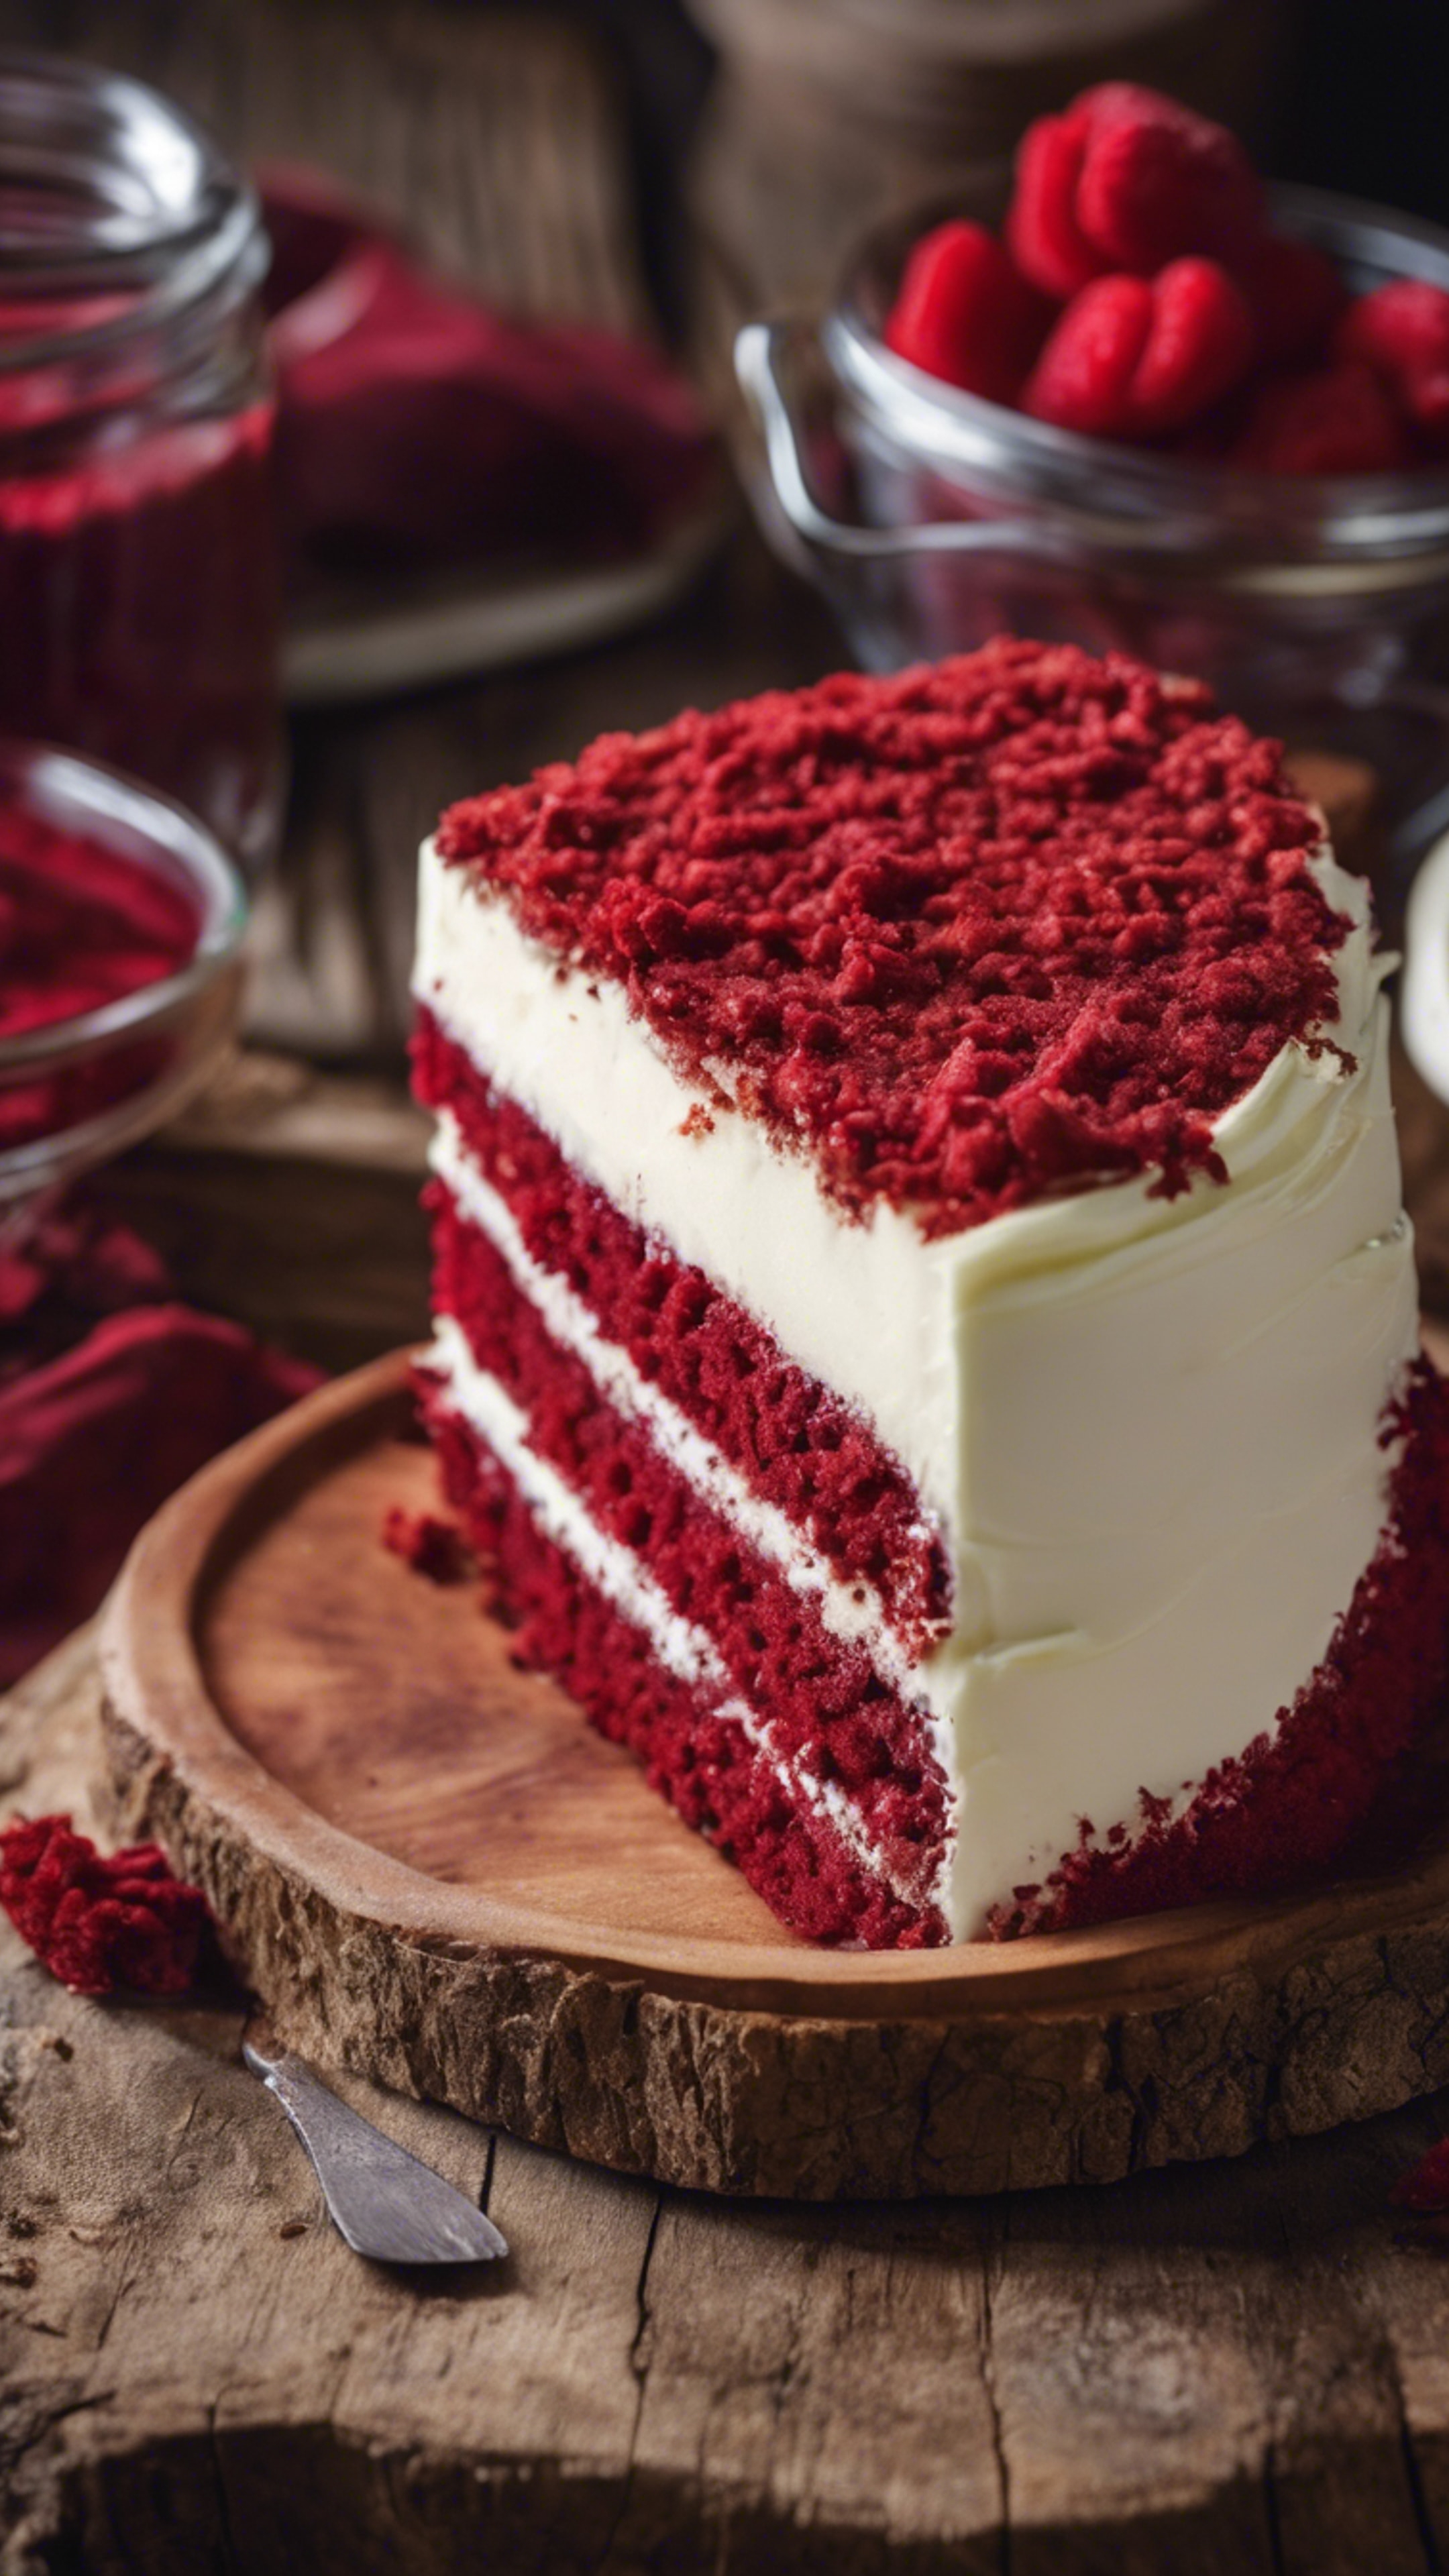 A slice of rich red velvet cake with a layer of cream cheese frosting, placed on a rustic wooden table. วอลล์เปเปอร์[5b147ad1f433484e86de]